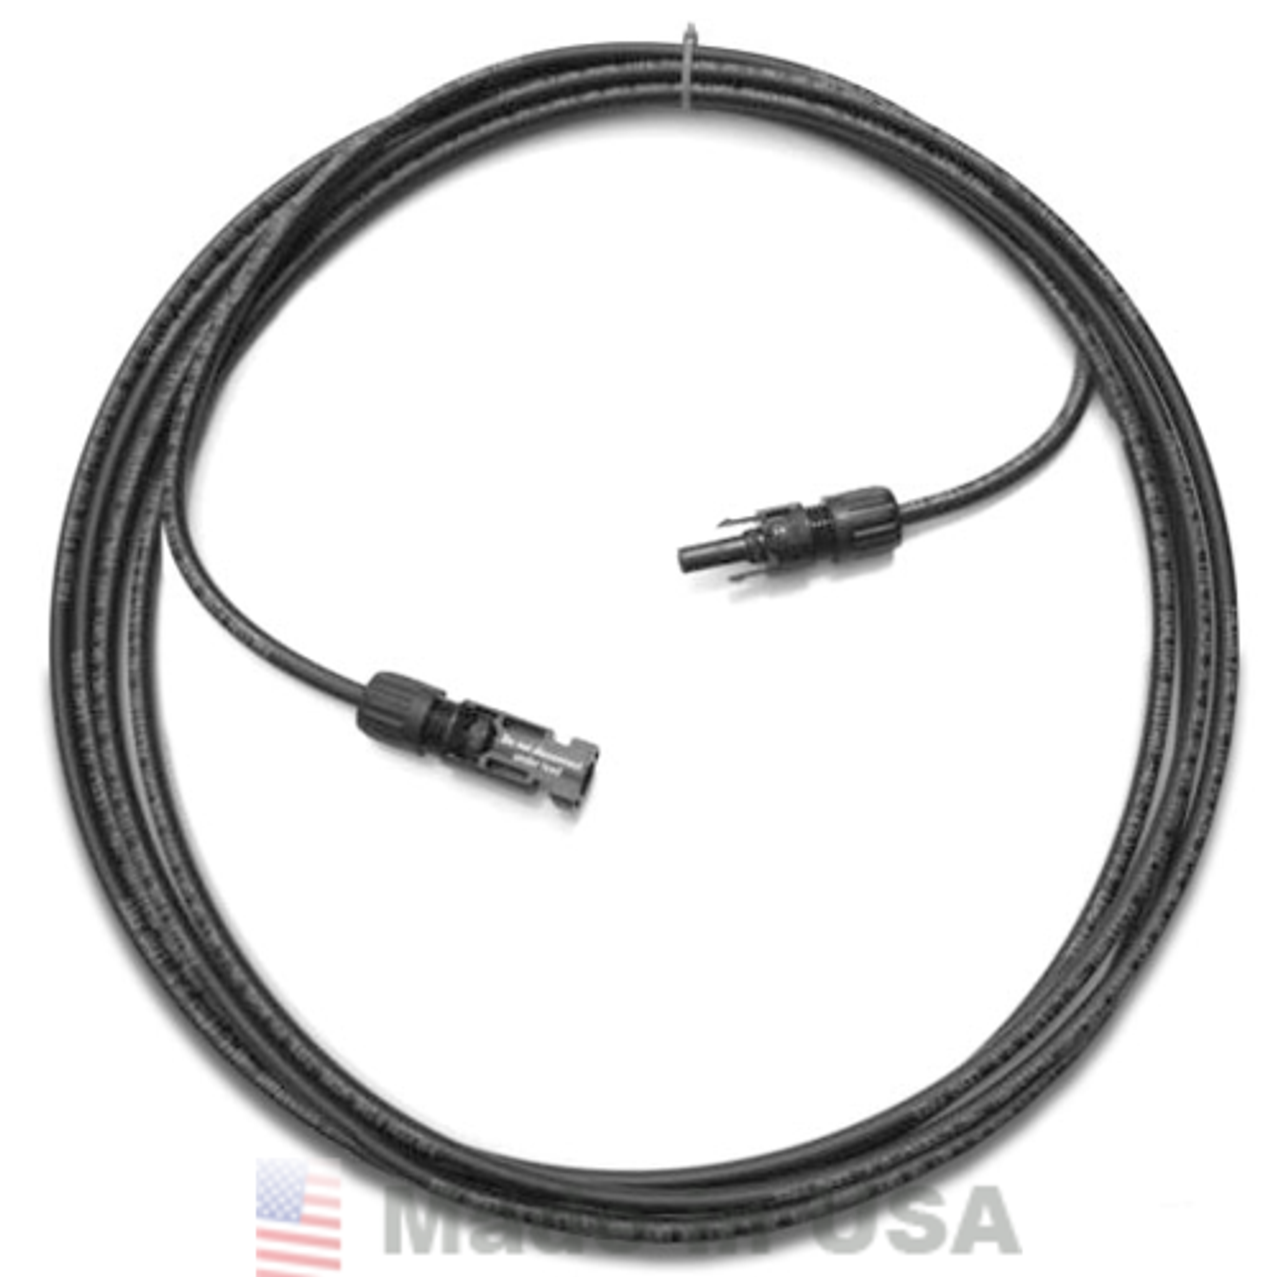 Multi-Contact 200' MC4 Connector Extension #10 AWG